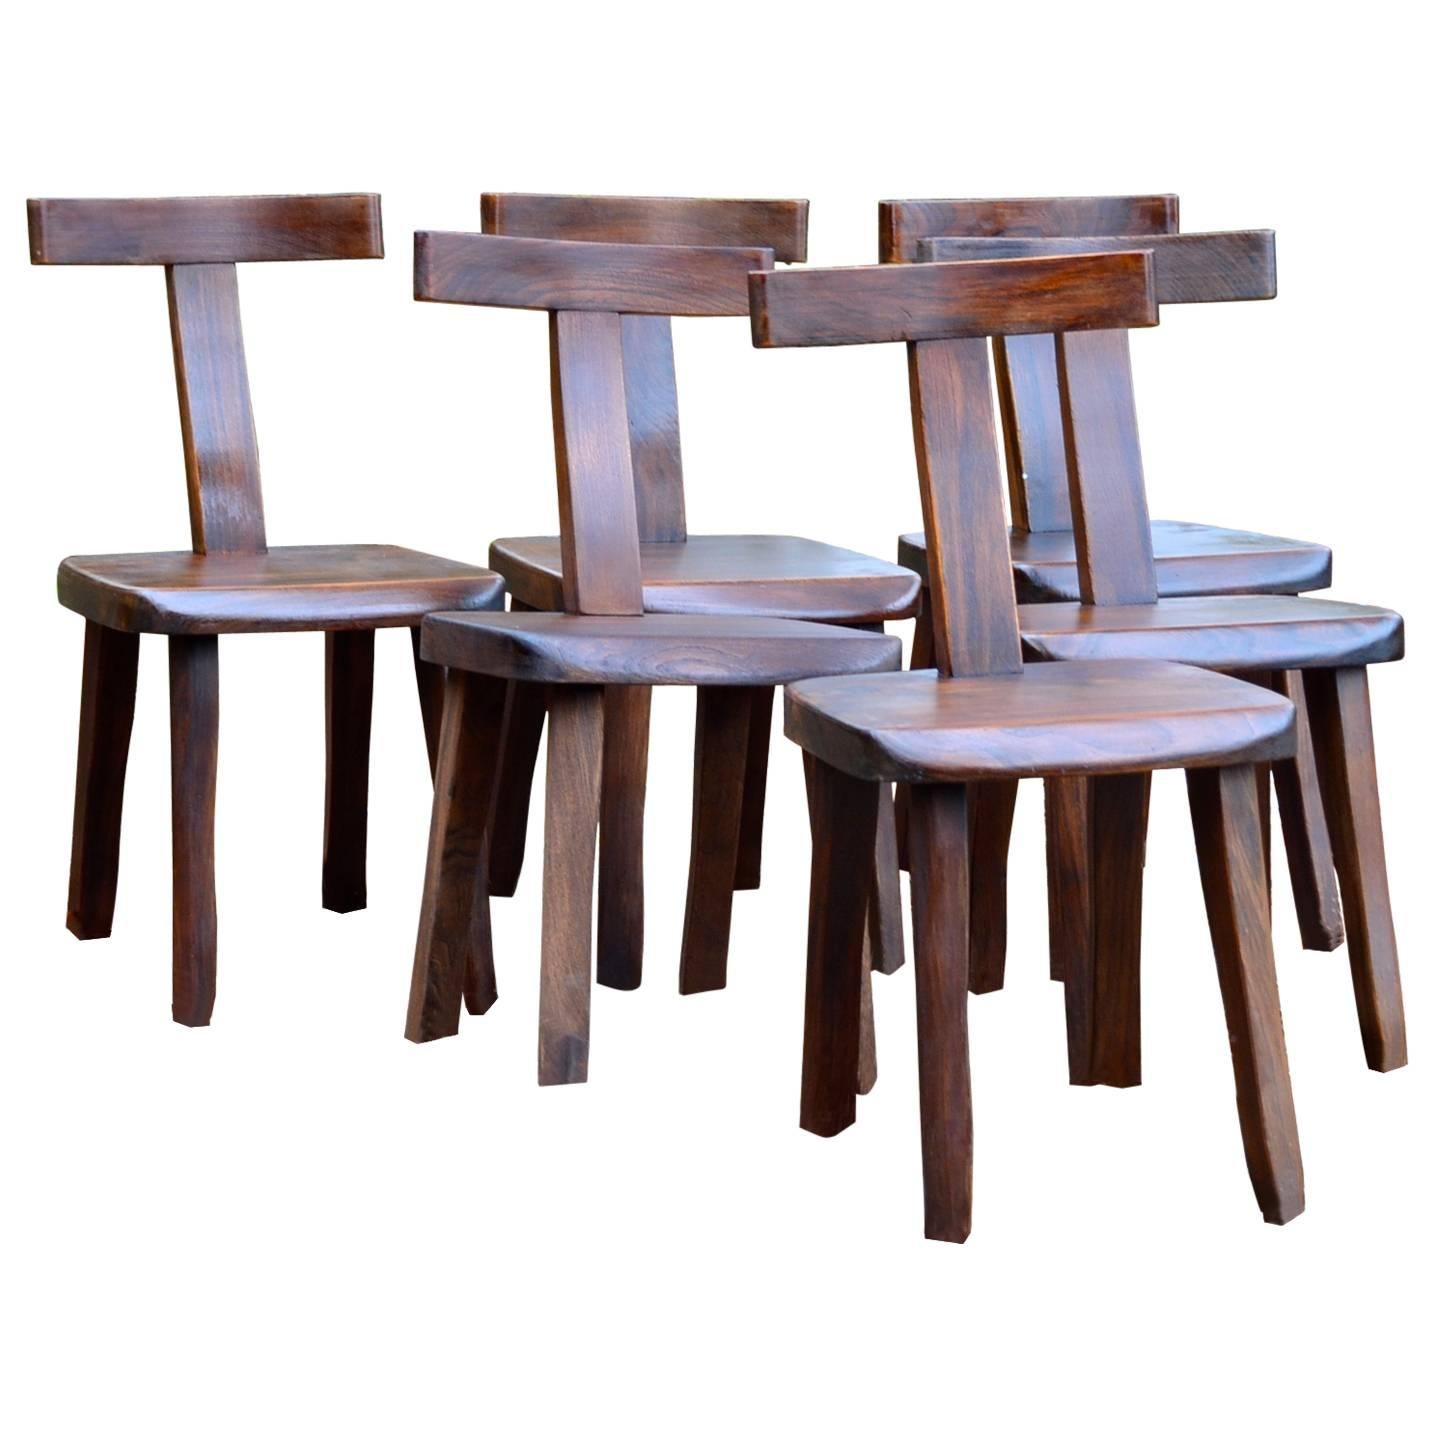 Set of Six Chairs by Olavi Hanninen, Finland 1950s For Sale